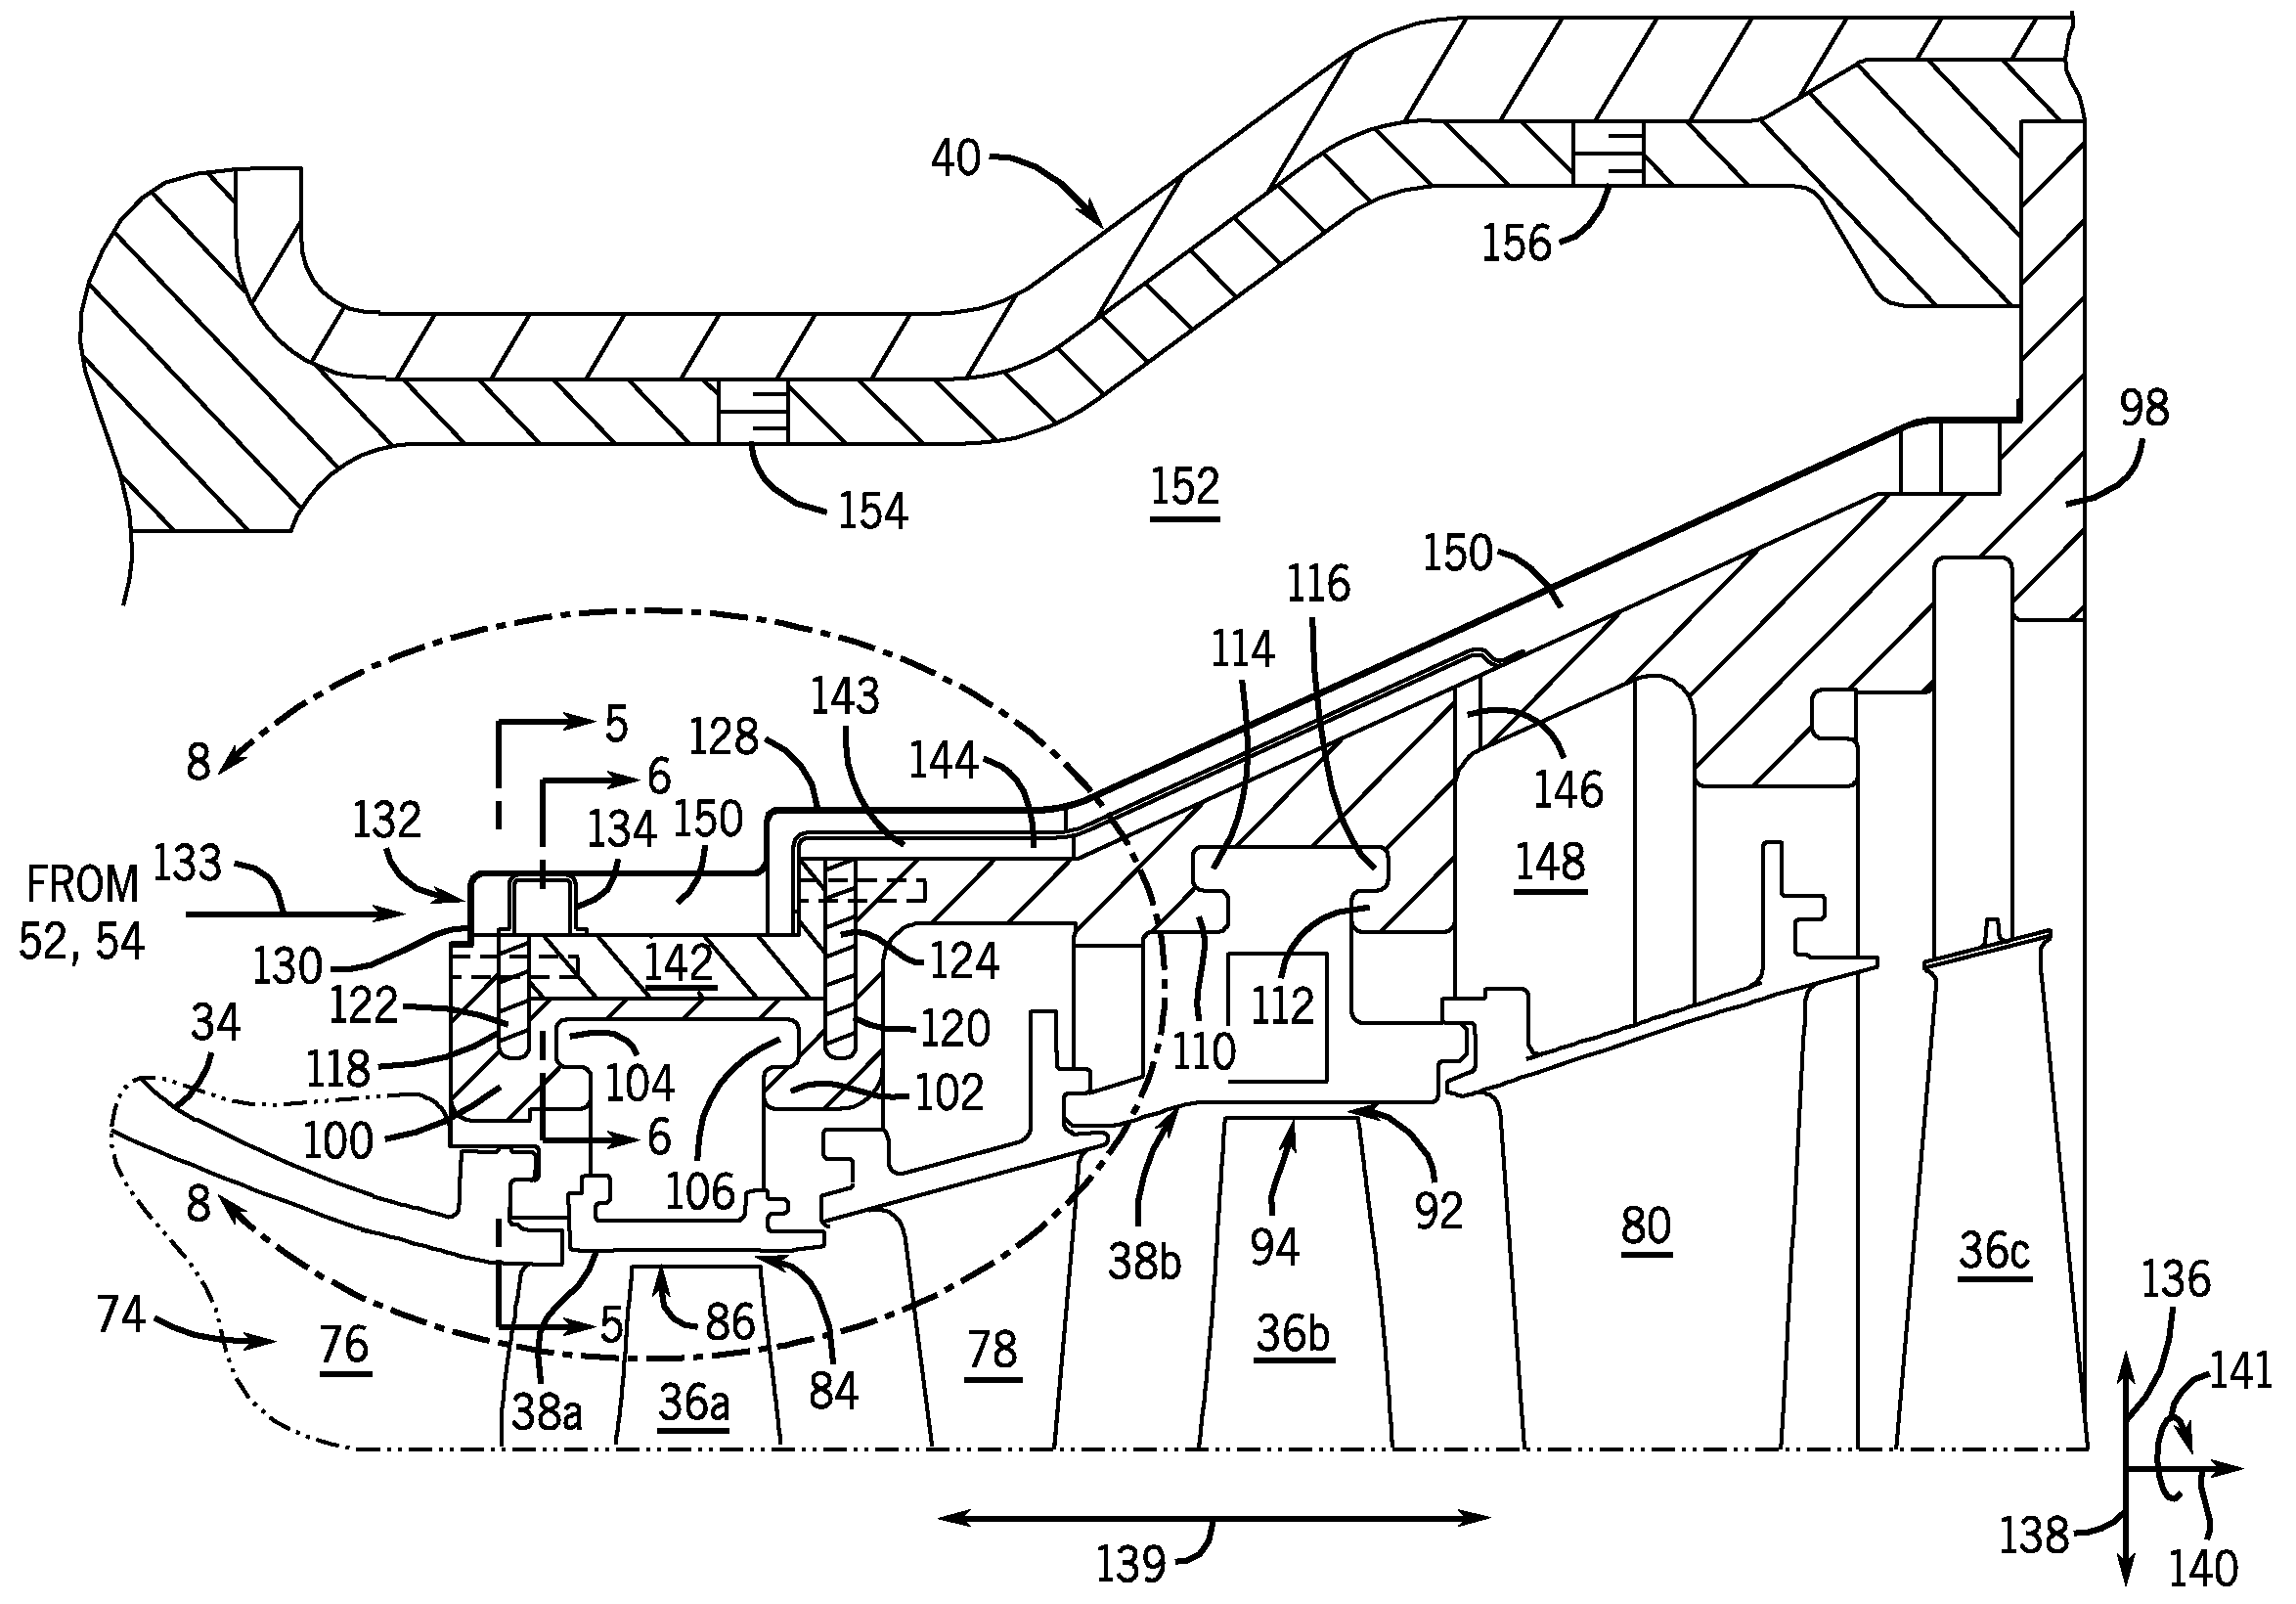 System and method for clearance control in a rotary machine